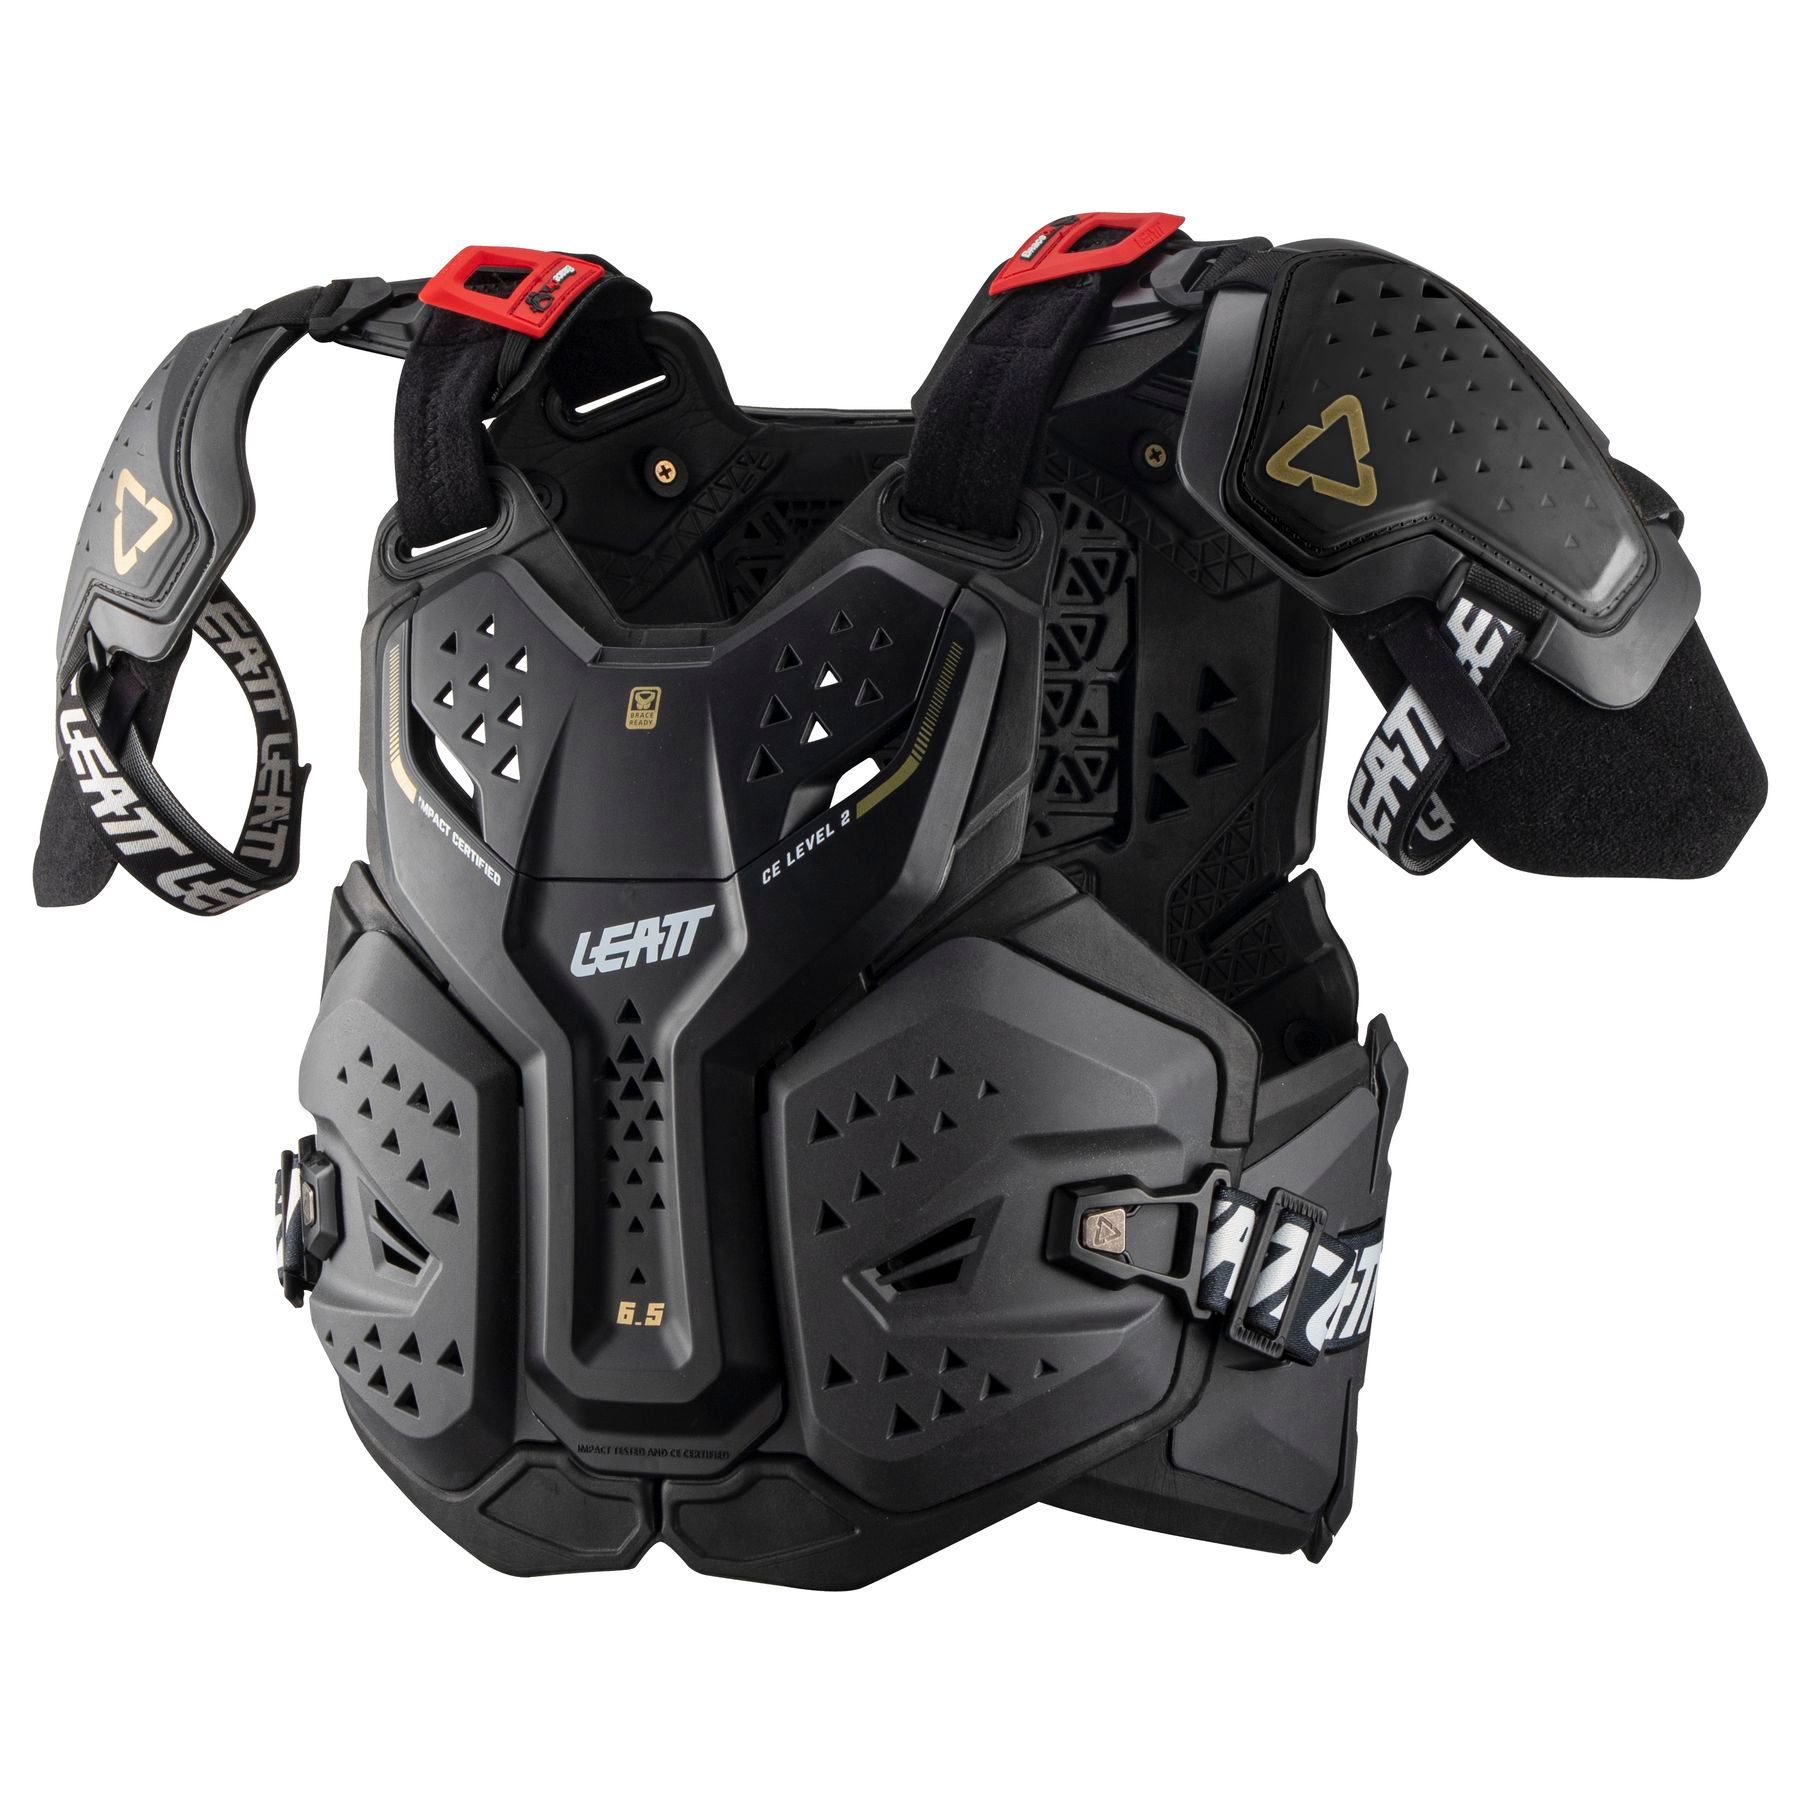 Mr Price Sport - Protective gear should be at the top of your list, and  right on budget. With us it is, everything you need to get those little  pros geared up